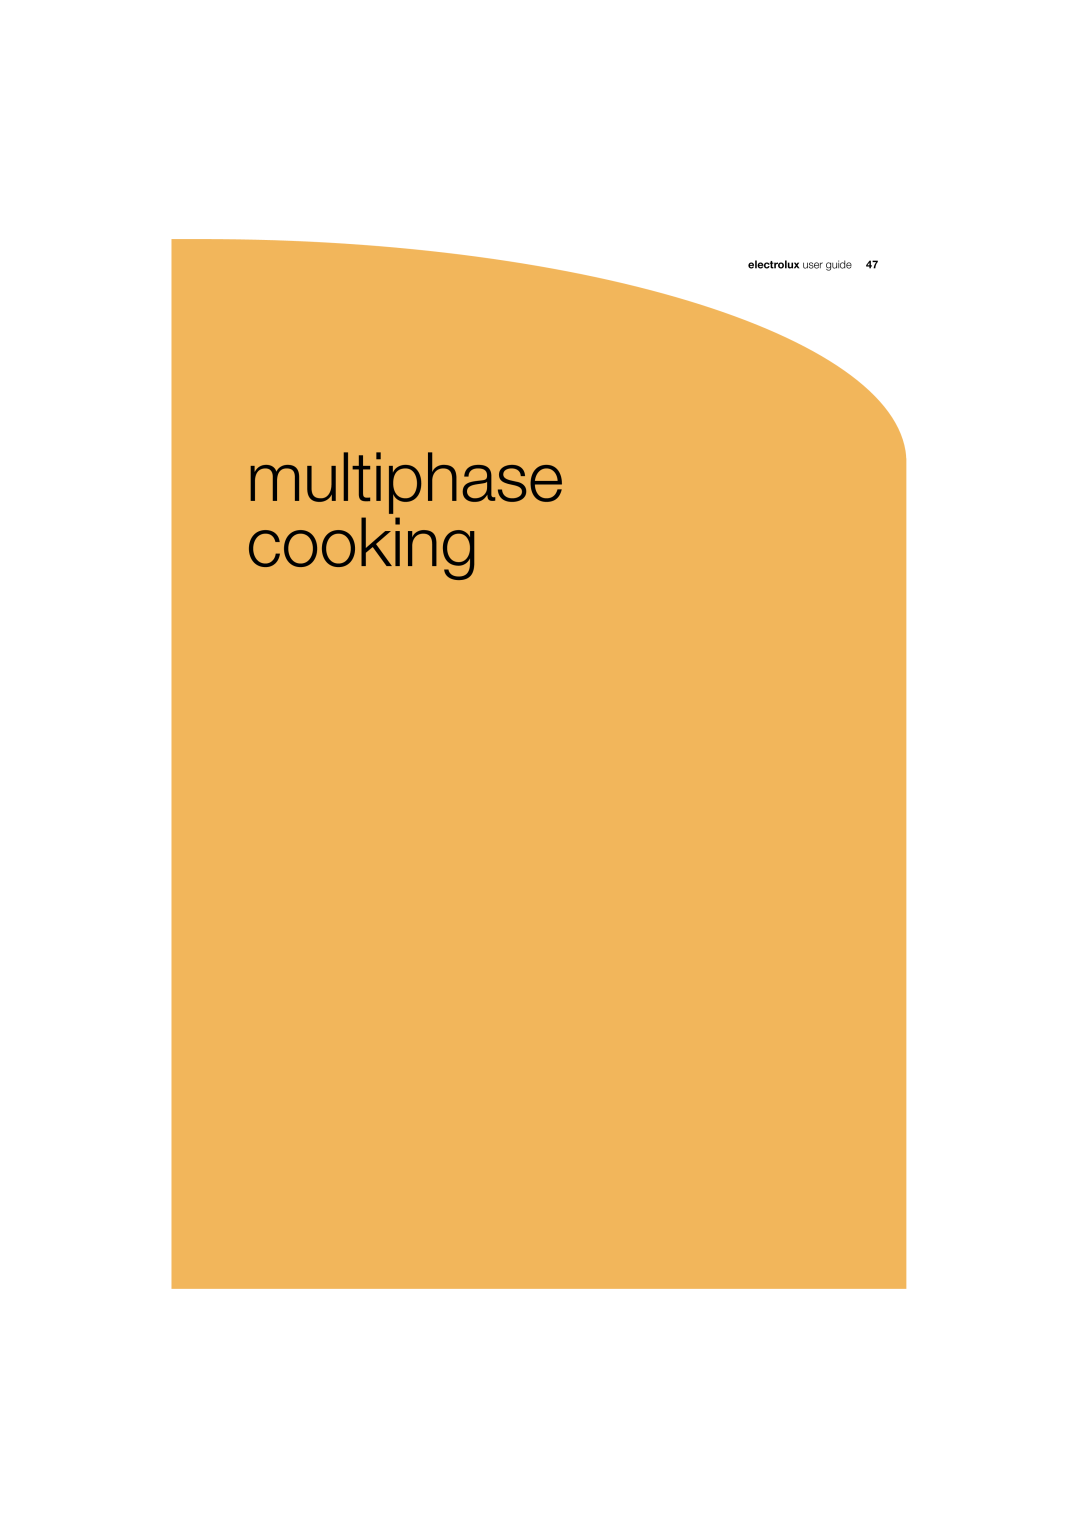 Electrolux 180 manual multiphase cooking, electrolux user guide 